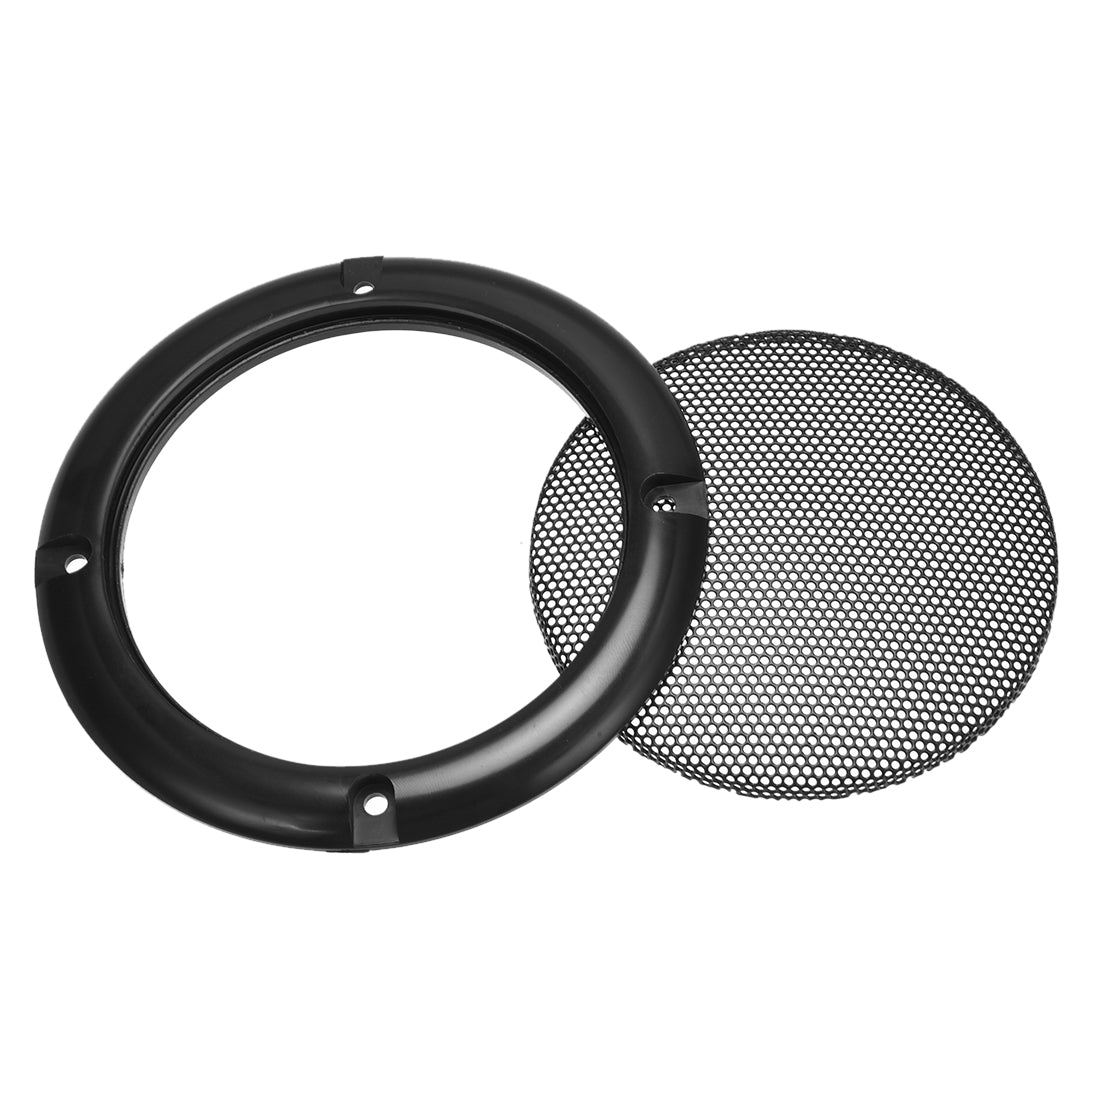 uxcell Uxcell Speaker Grill Cover 4 Inch 124mm Mesh Decorative Circle Subwoofer Guard Protector Black